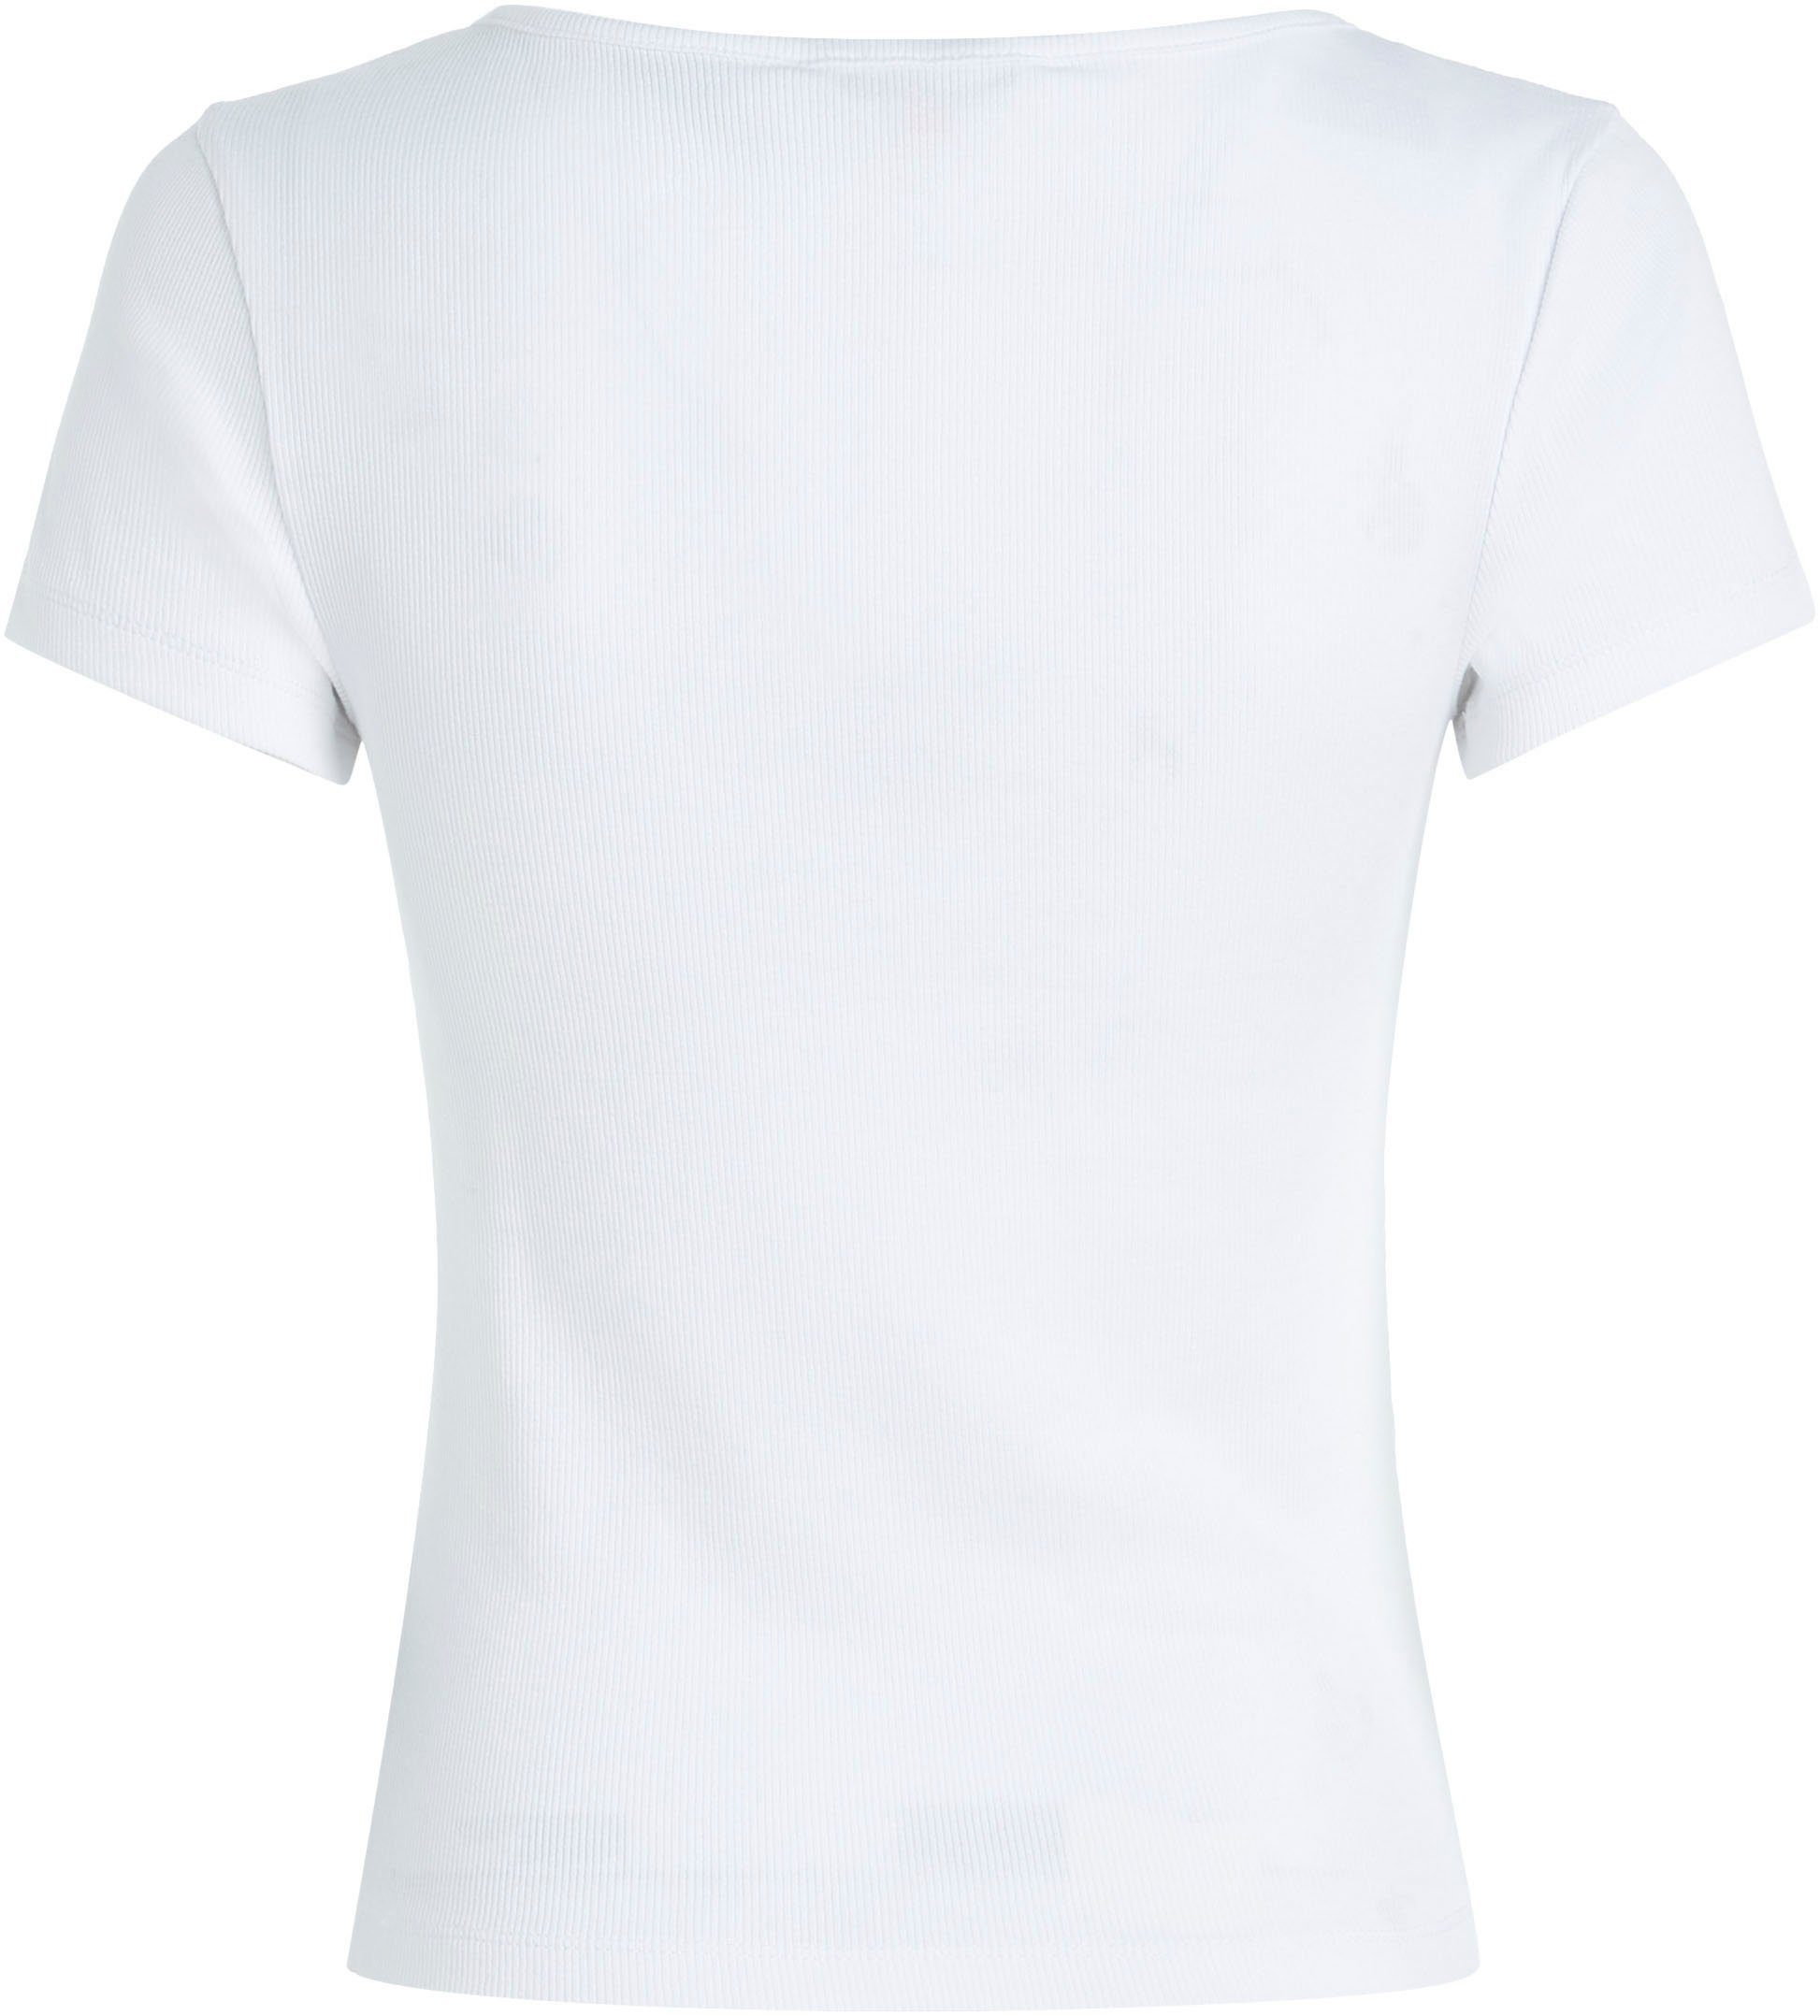 Tommy Jeans T-Shirt Tommy White BBY Jeans Logostickerei BUTTON TJW mit C-NECK RIB